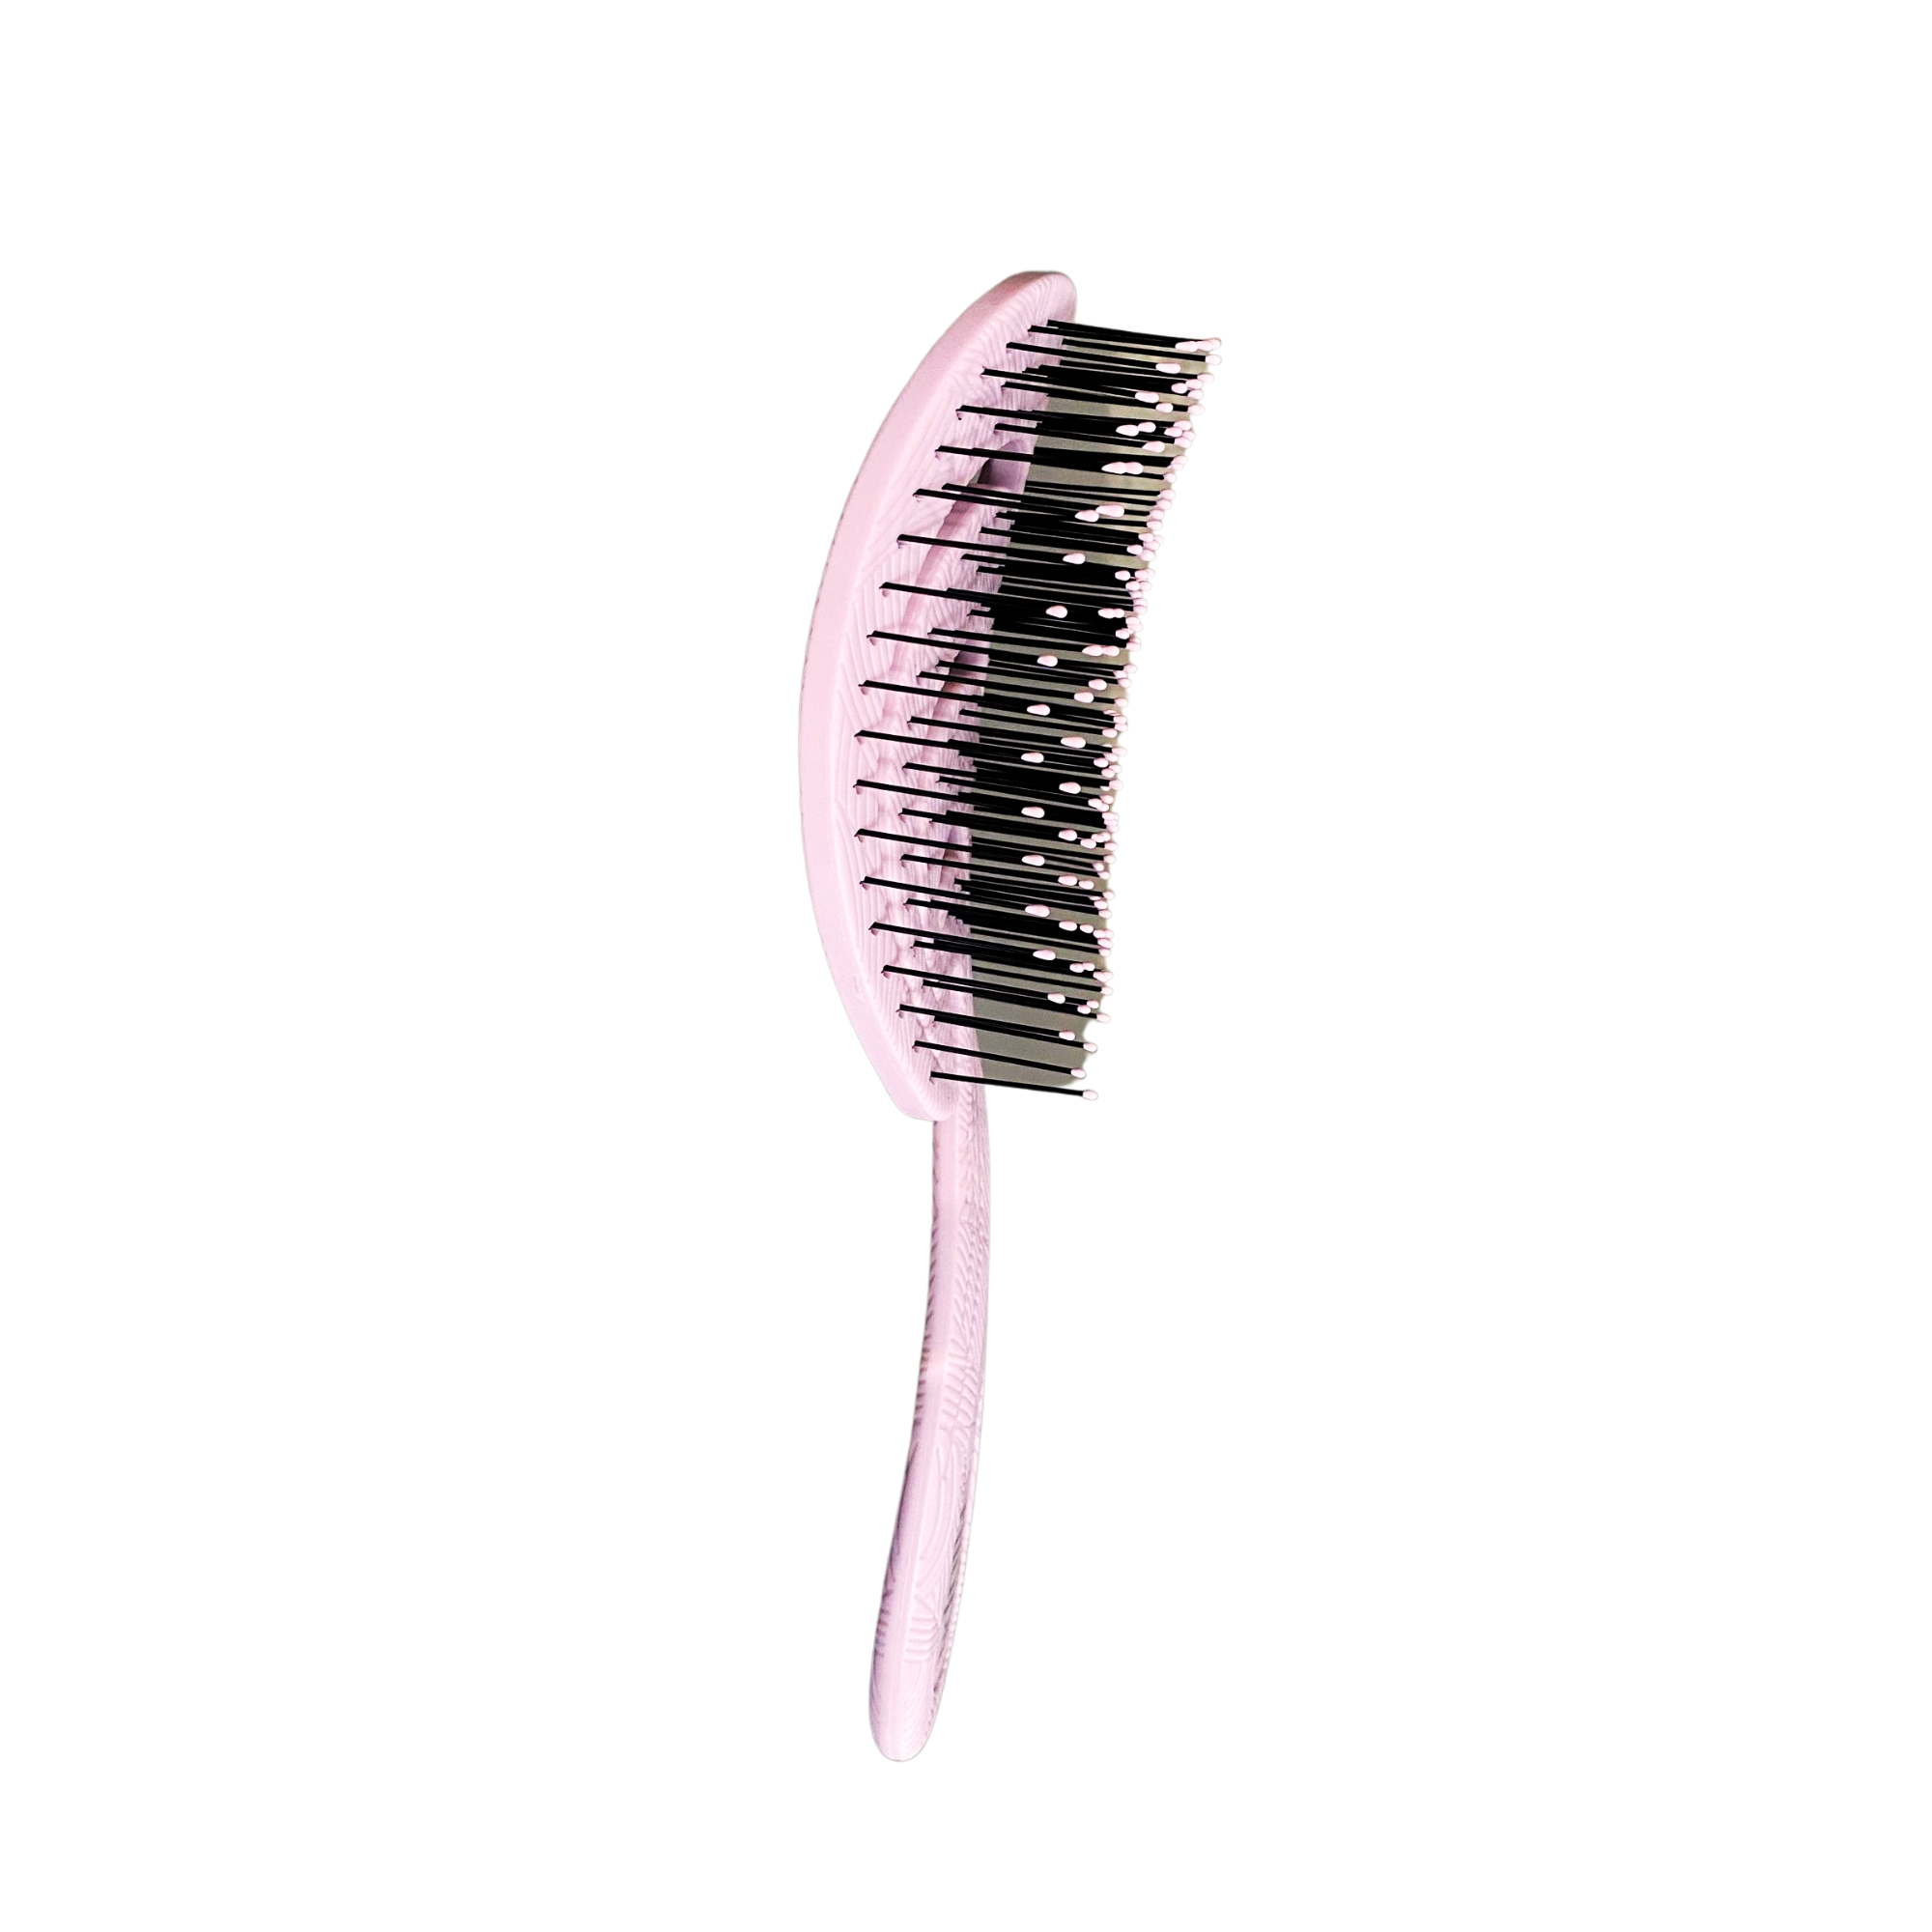 Filupa Pale Pink Brush from Nordic Bio Brush is 100% recyclable. The brush won't pull on your hair and smoothes the finer hair with ease.